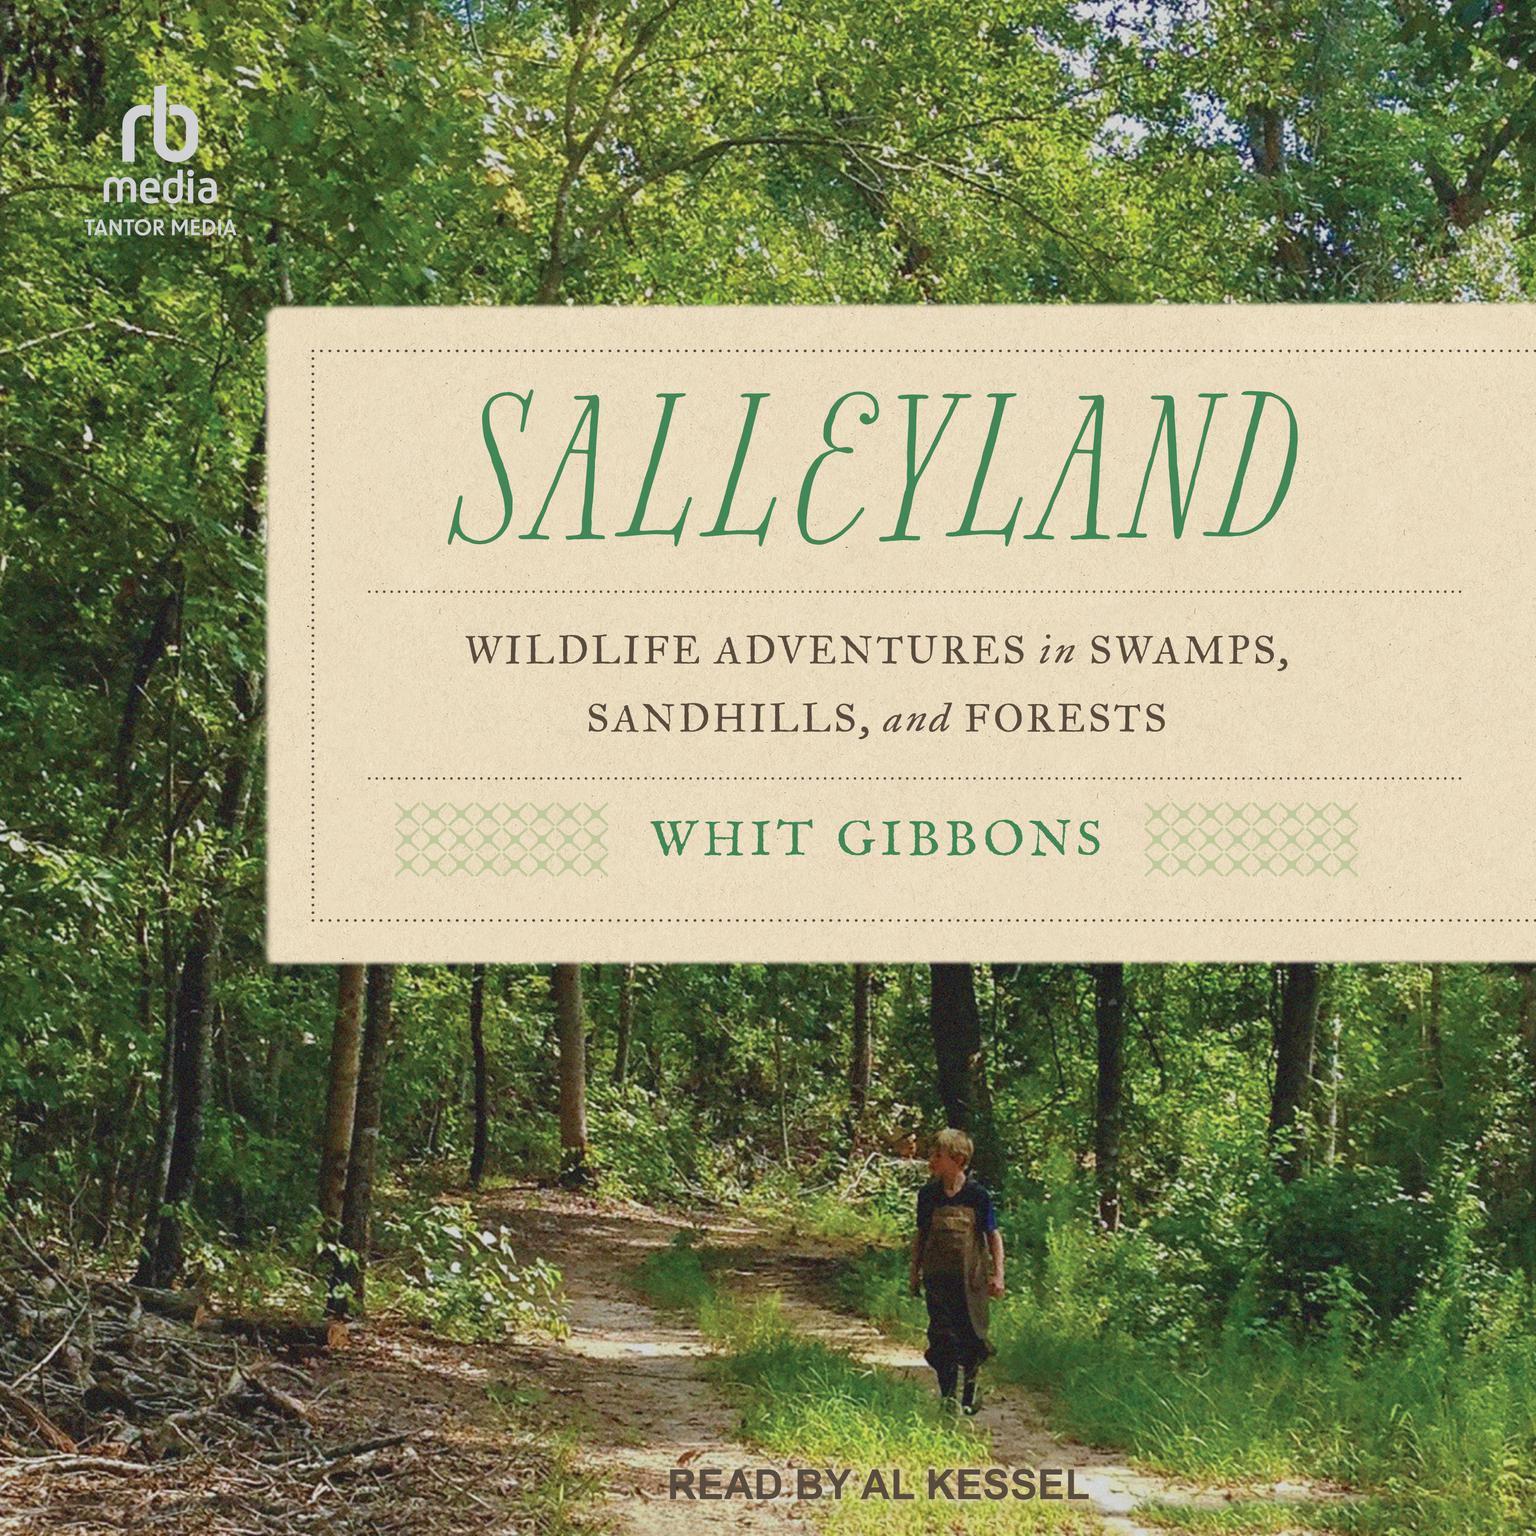 Salleyland: Wildlife Adventures in Swamps, Sandhills, and Forests Audiobook, by J. Whitfield Gibbons